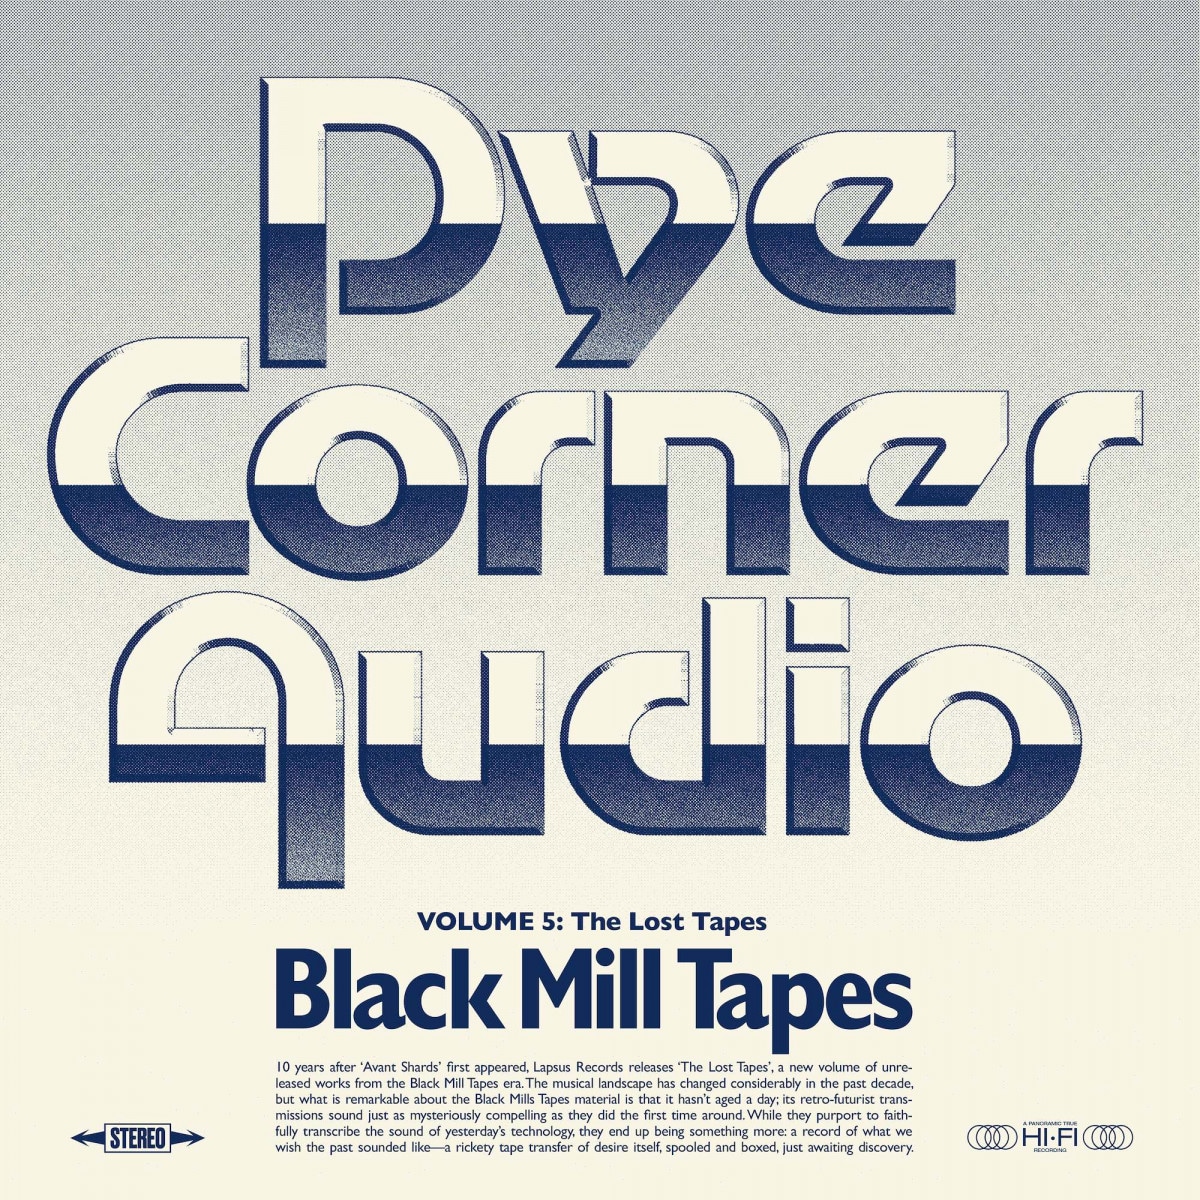 Pye Corner Audio - Black Mill Tapes Volume 5: The Lost Tapes - LPS27 - LAPSUS RECORDS